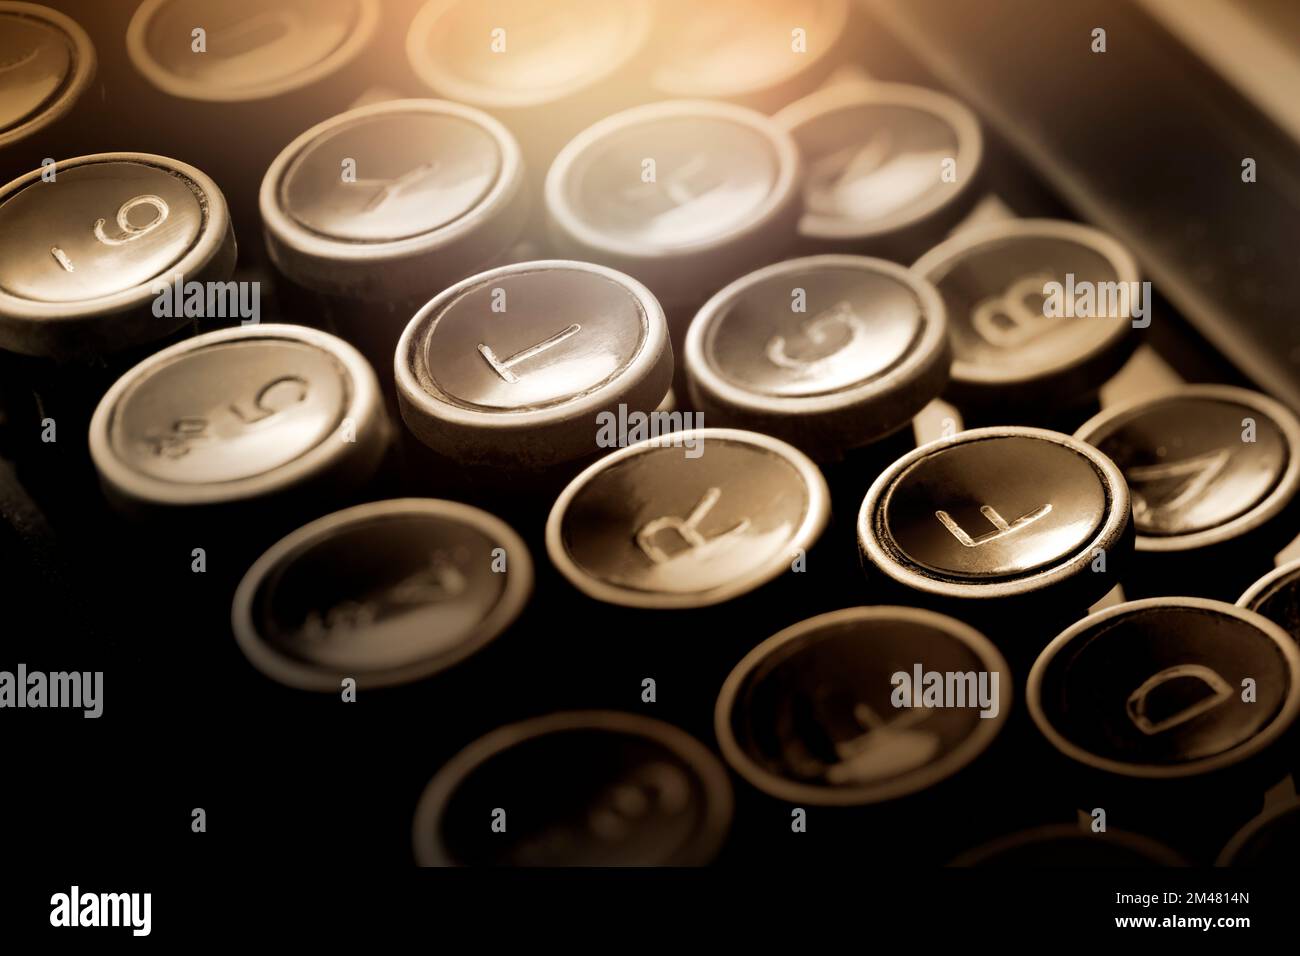 Shallow focus on close up view of ancient types keys. Warm light effect to give intimate ambience. Stock Photo